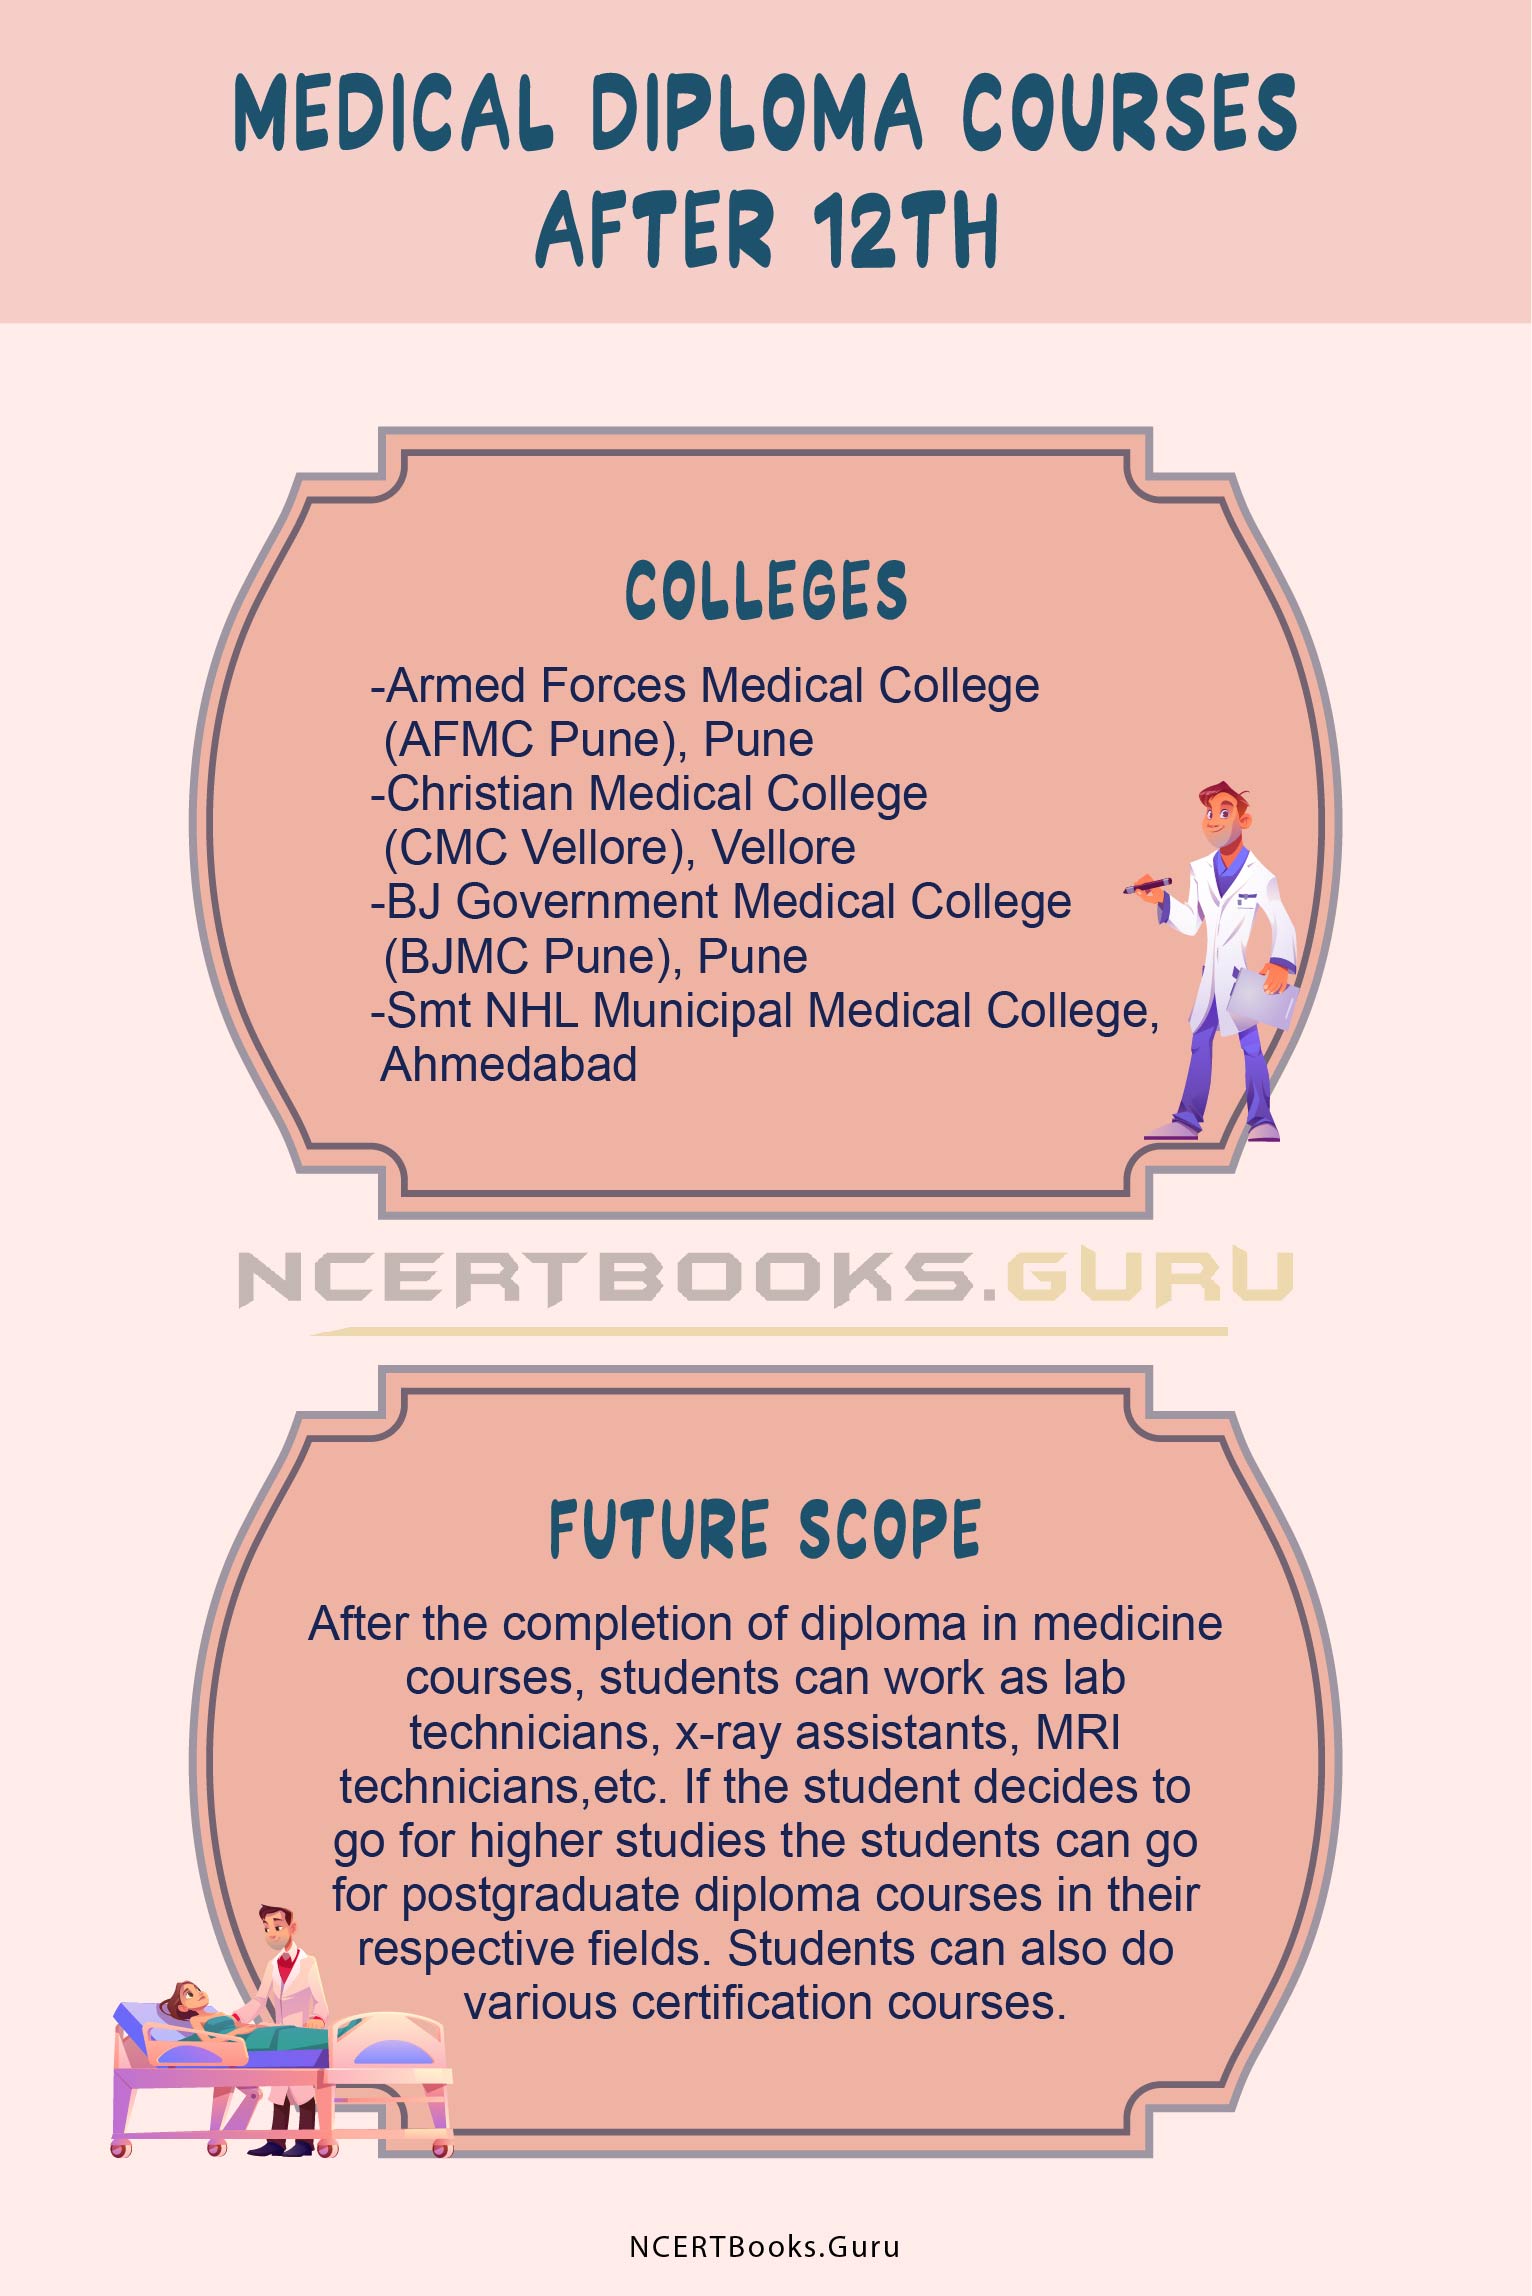 Medical Diploma Courses After 12th